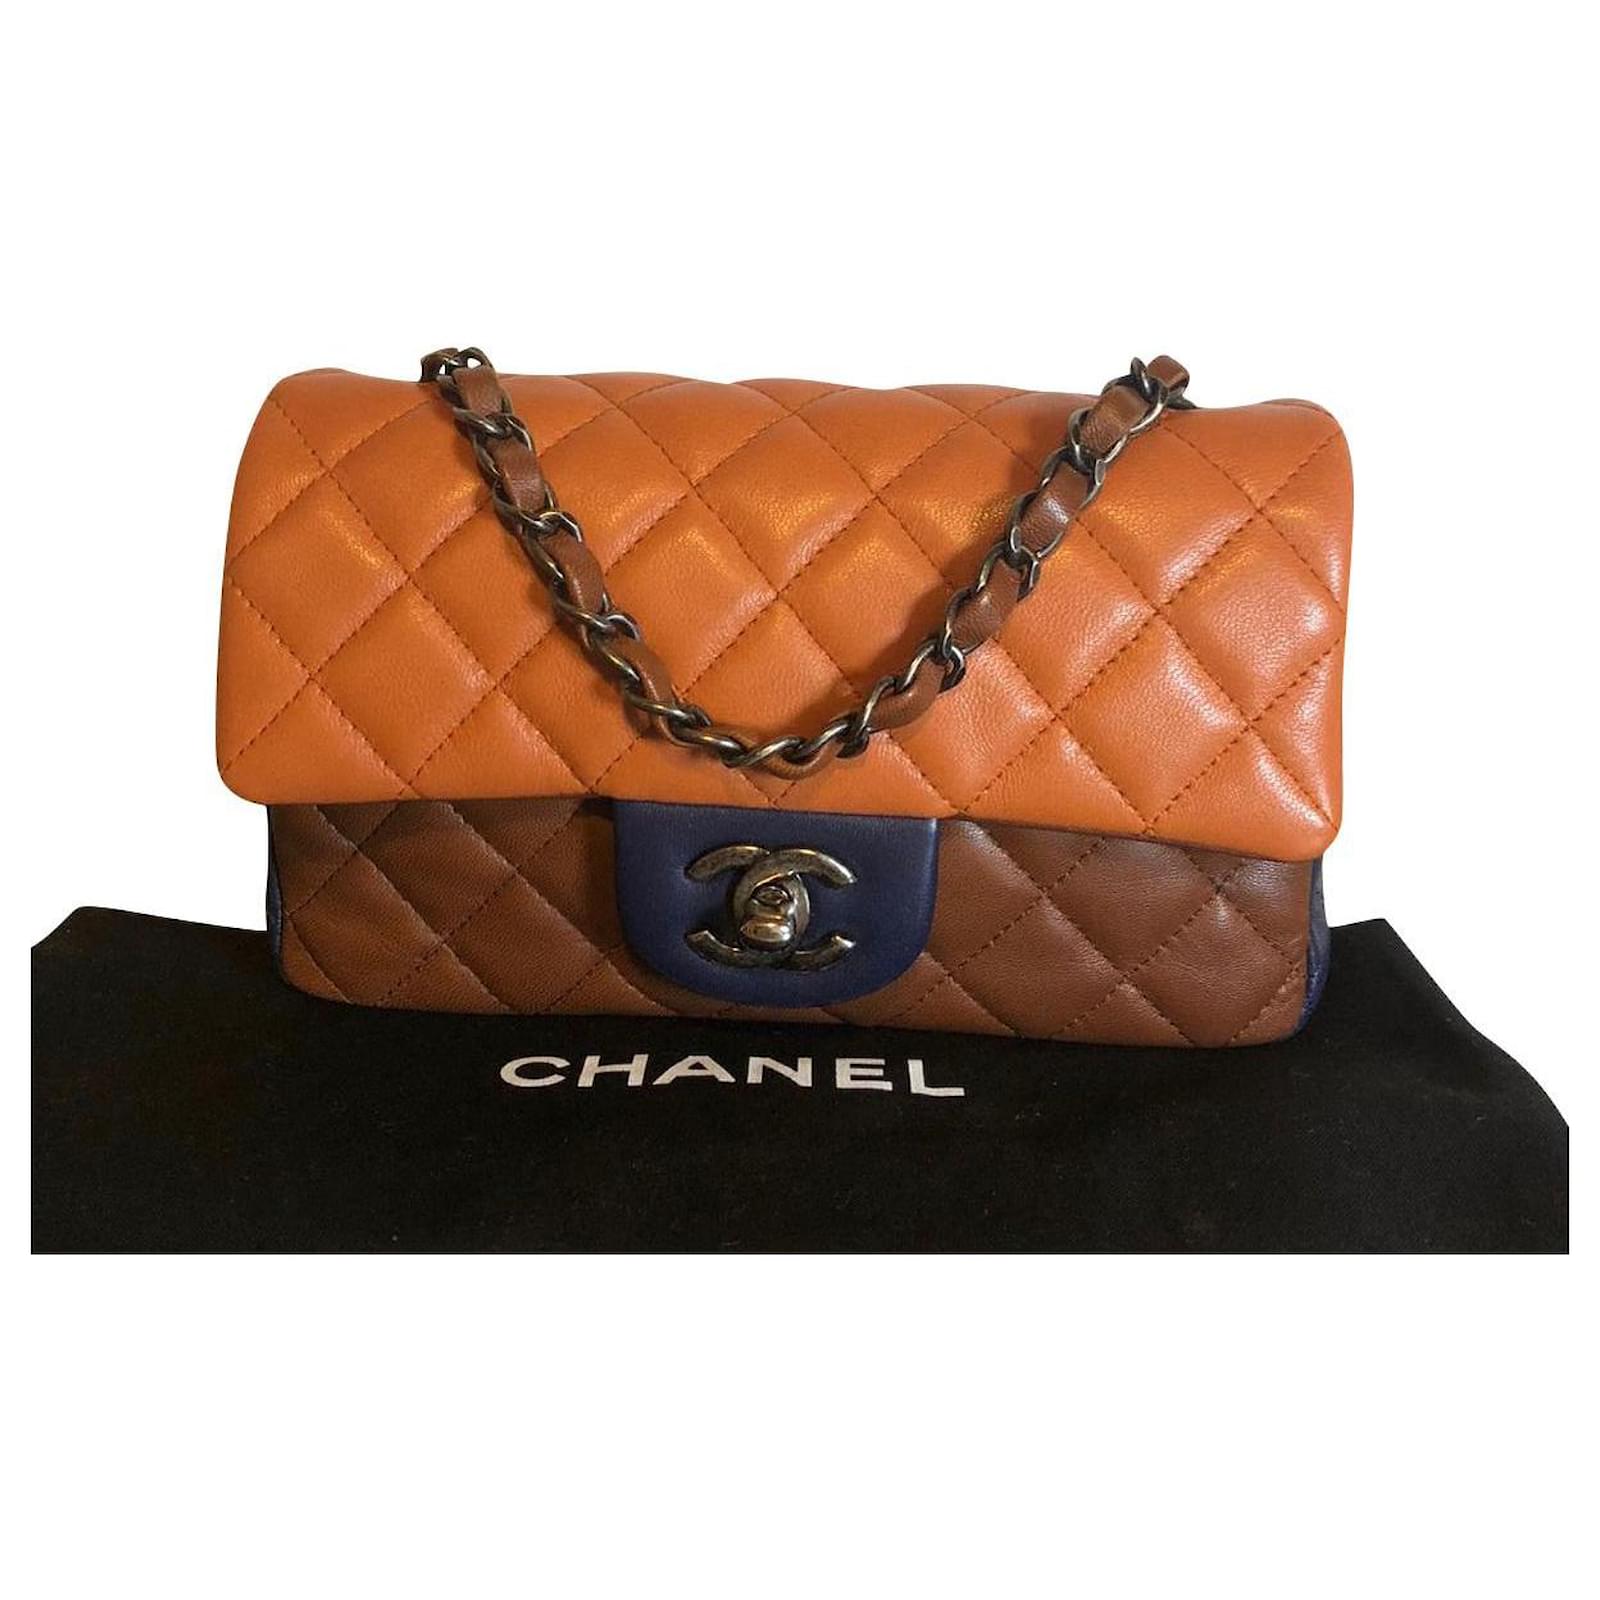 Chanel Orange Quilted Leather New Mini Classic Single Flap Bag at